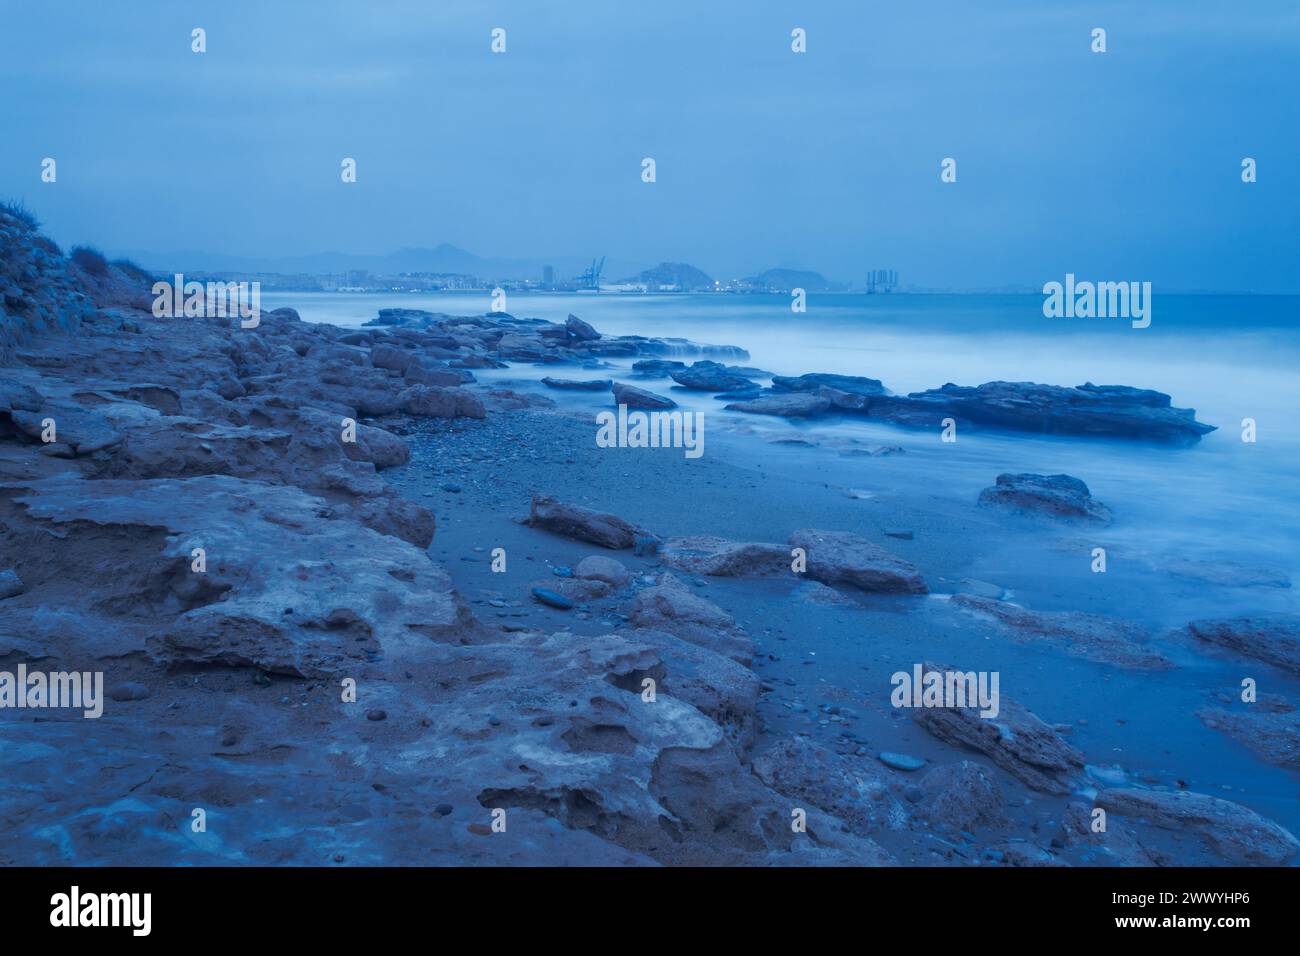 Long exposure on Agua Amar beach in Alicante during stormy weather. Spain Stock Photo